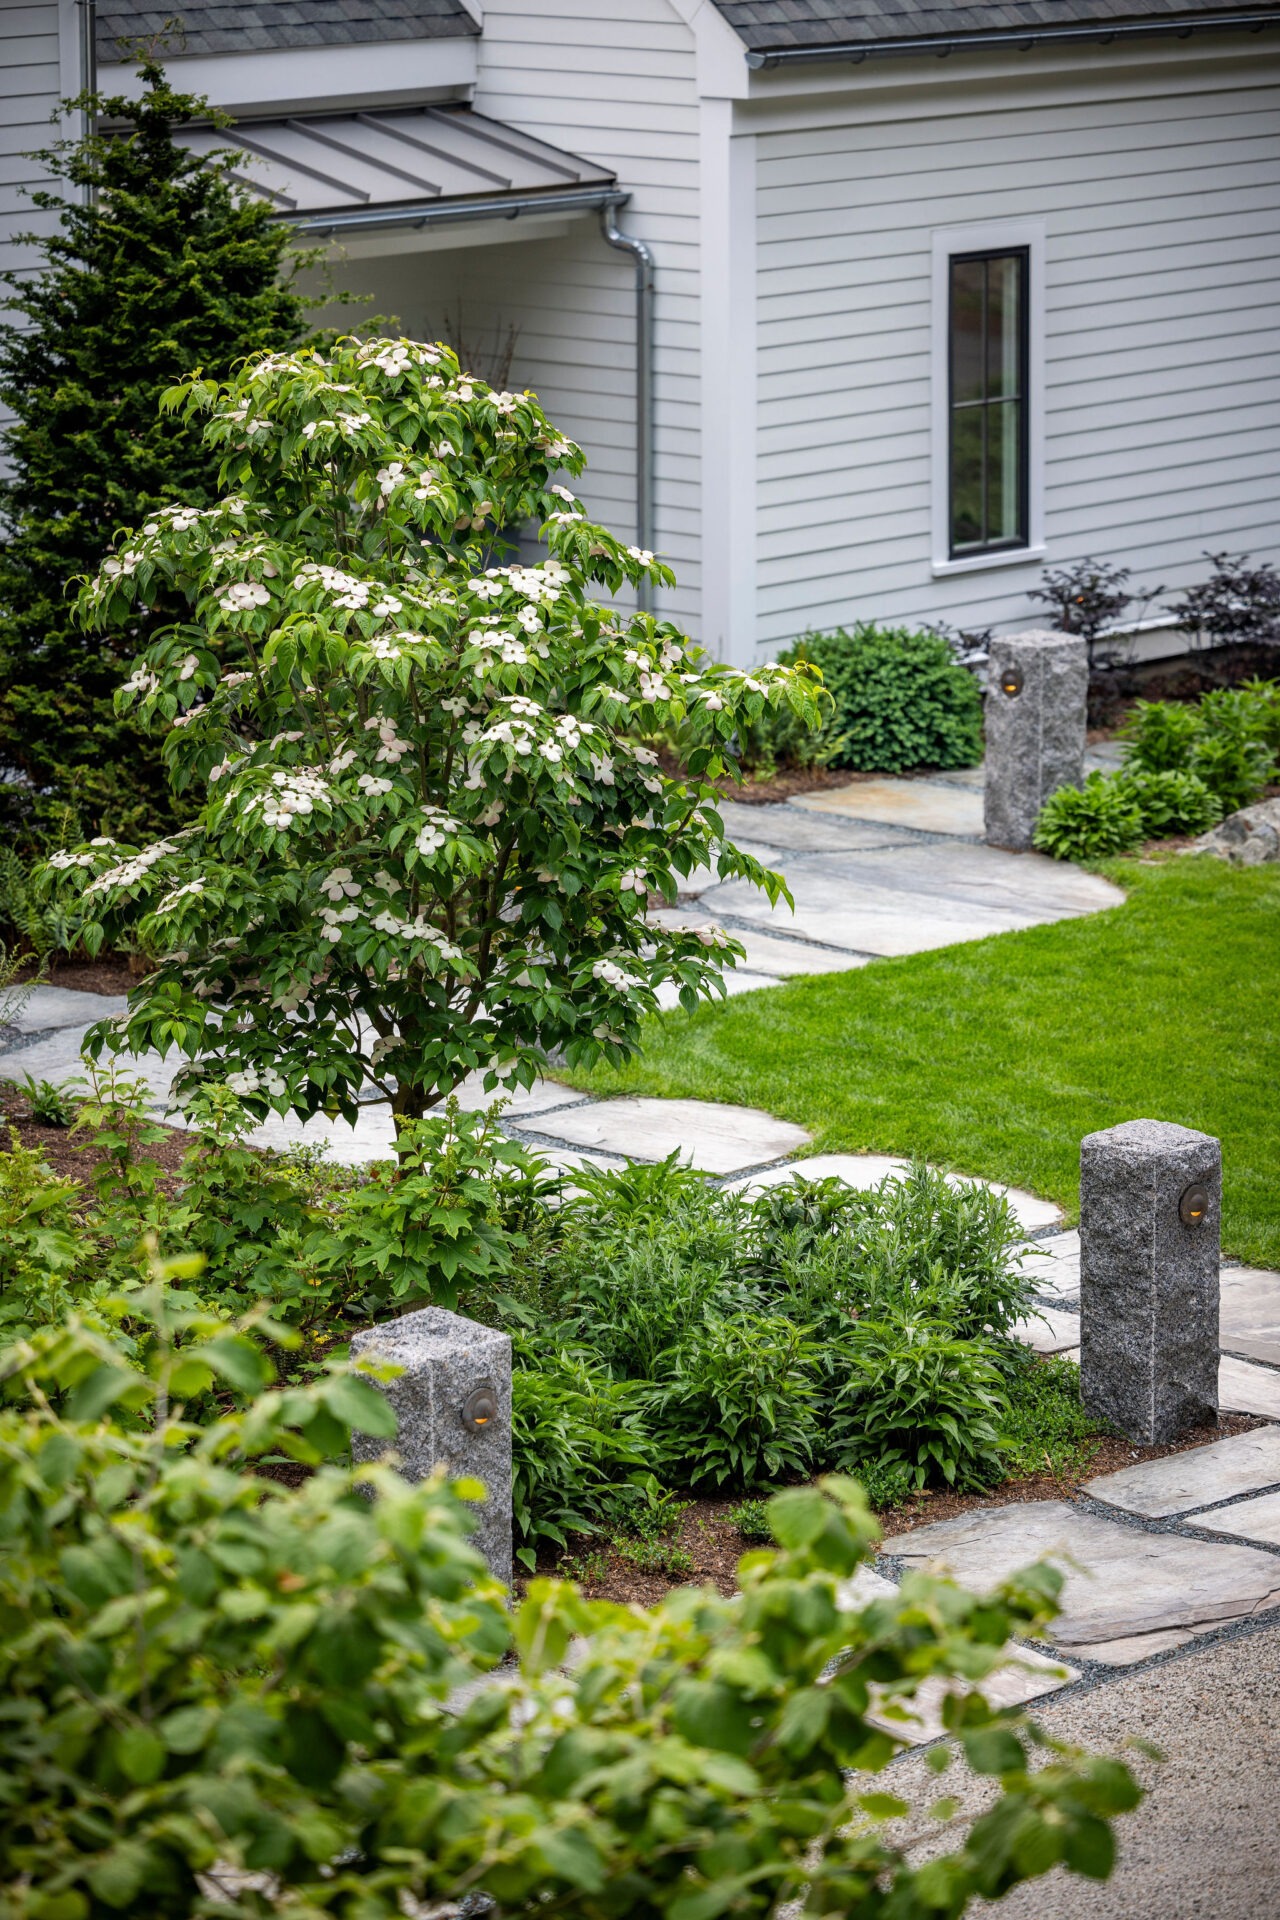 This image shows a landscaped garden with a flowering bush, green shrubs, a stone pathway, and granite posts by a grey house.